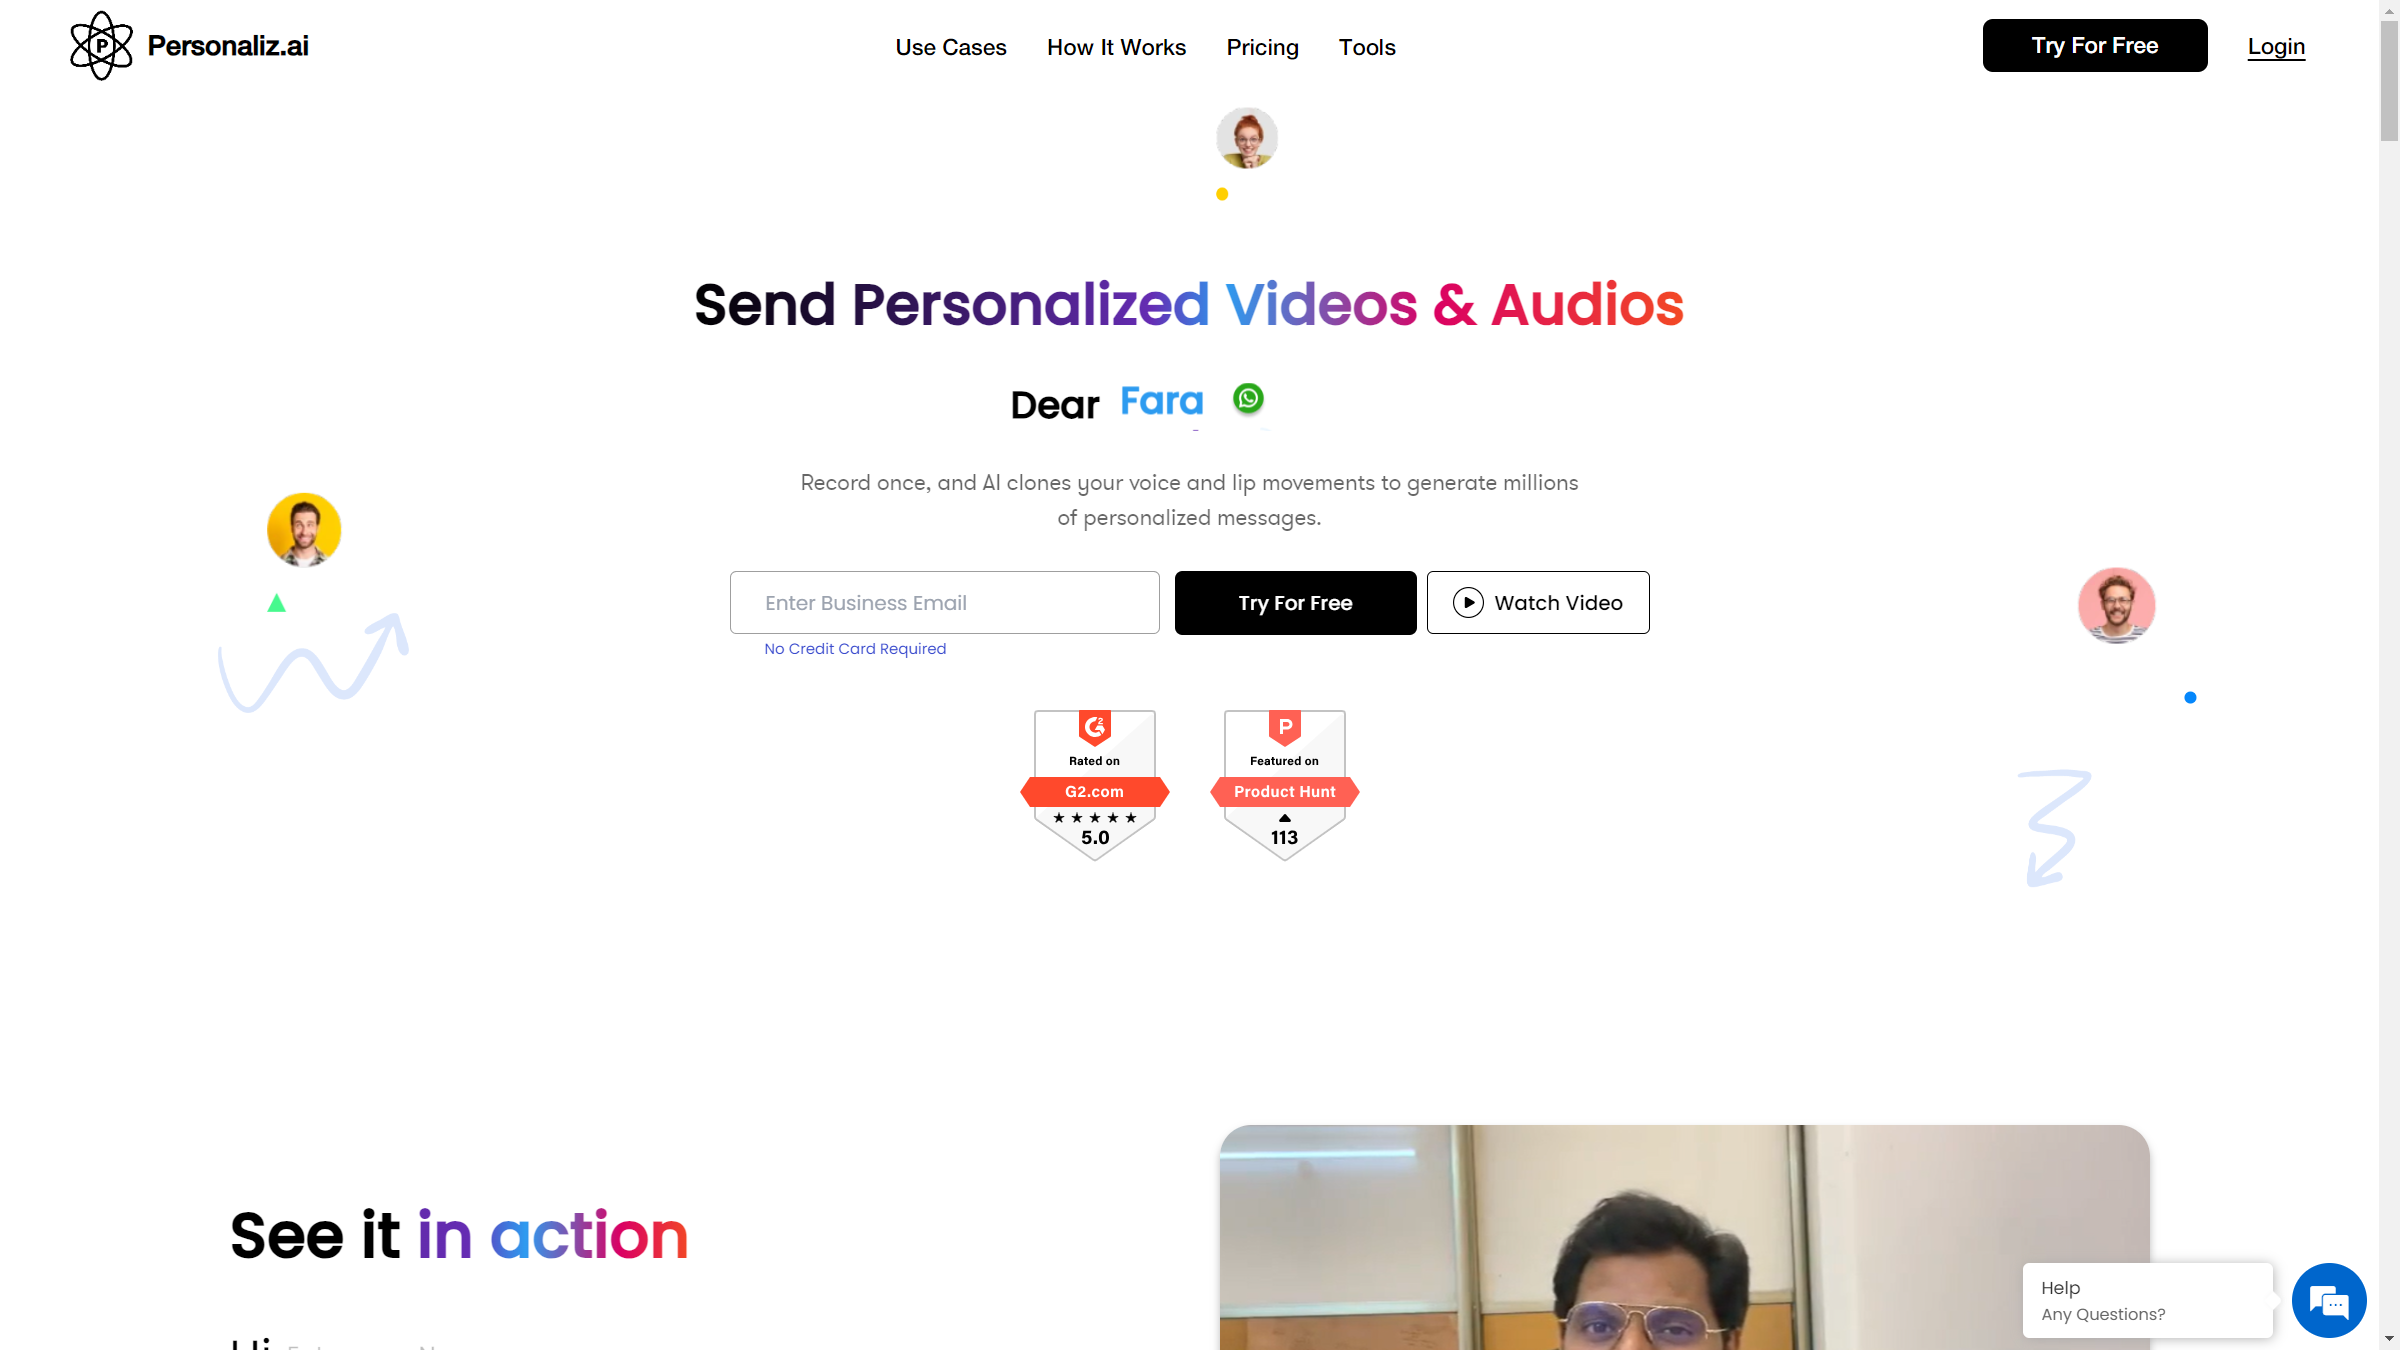 Personalized video at scale, effortlessly